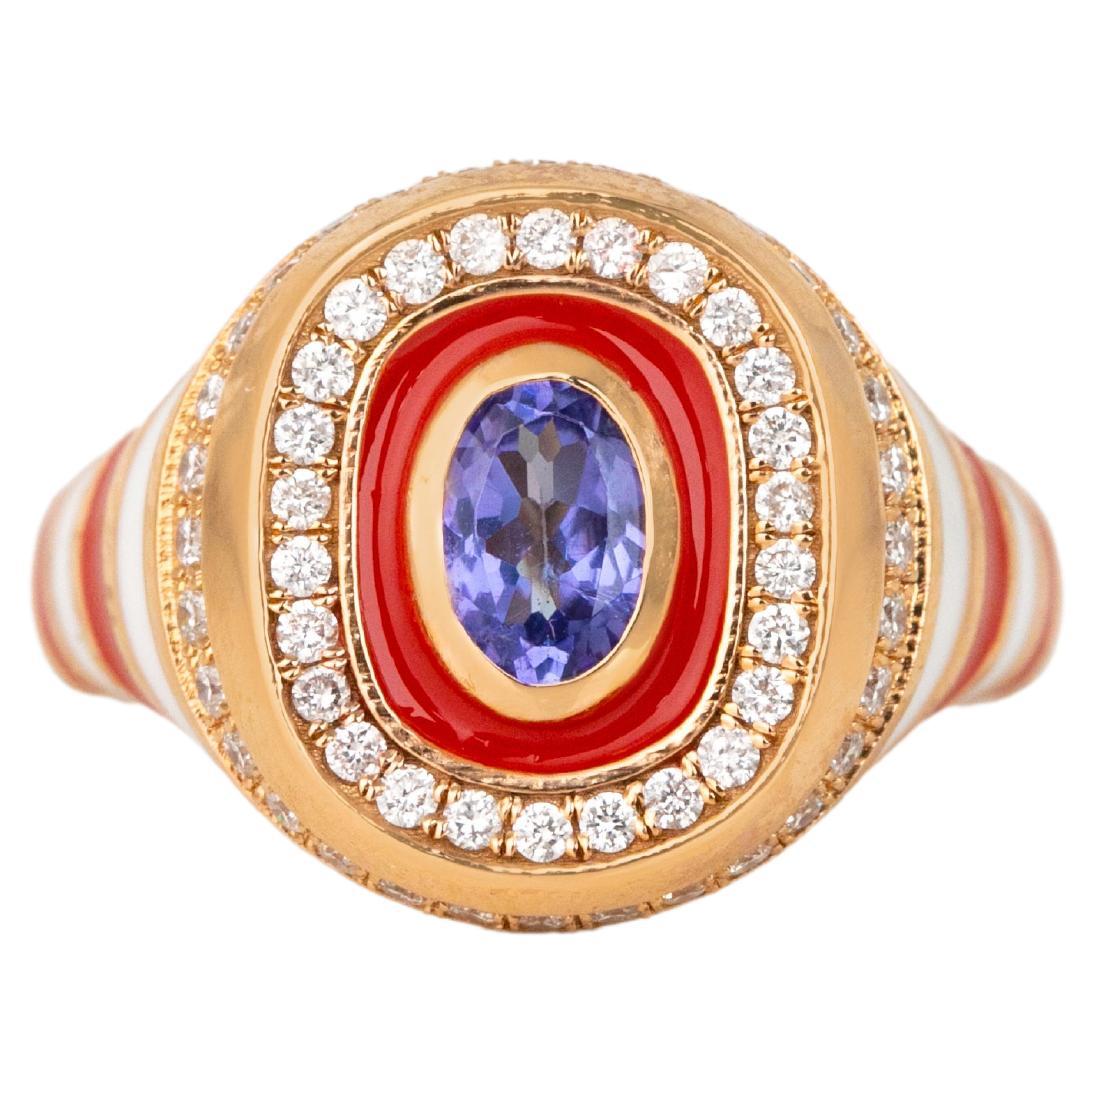 For Sale:  14K Gold 0.54 Ct Tanzanite & Diamond Enameled Cocktail Ring, Chevalier Ring